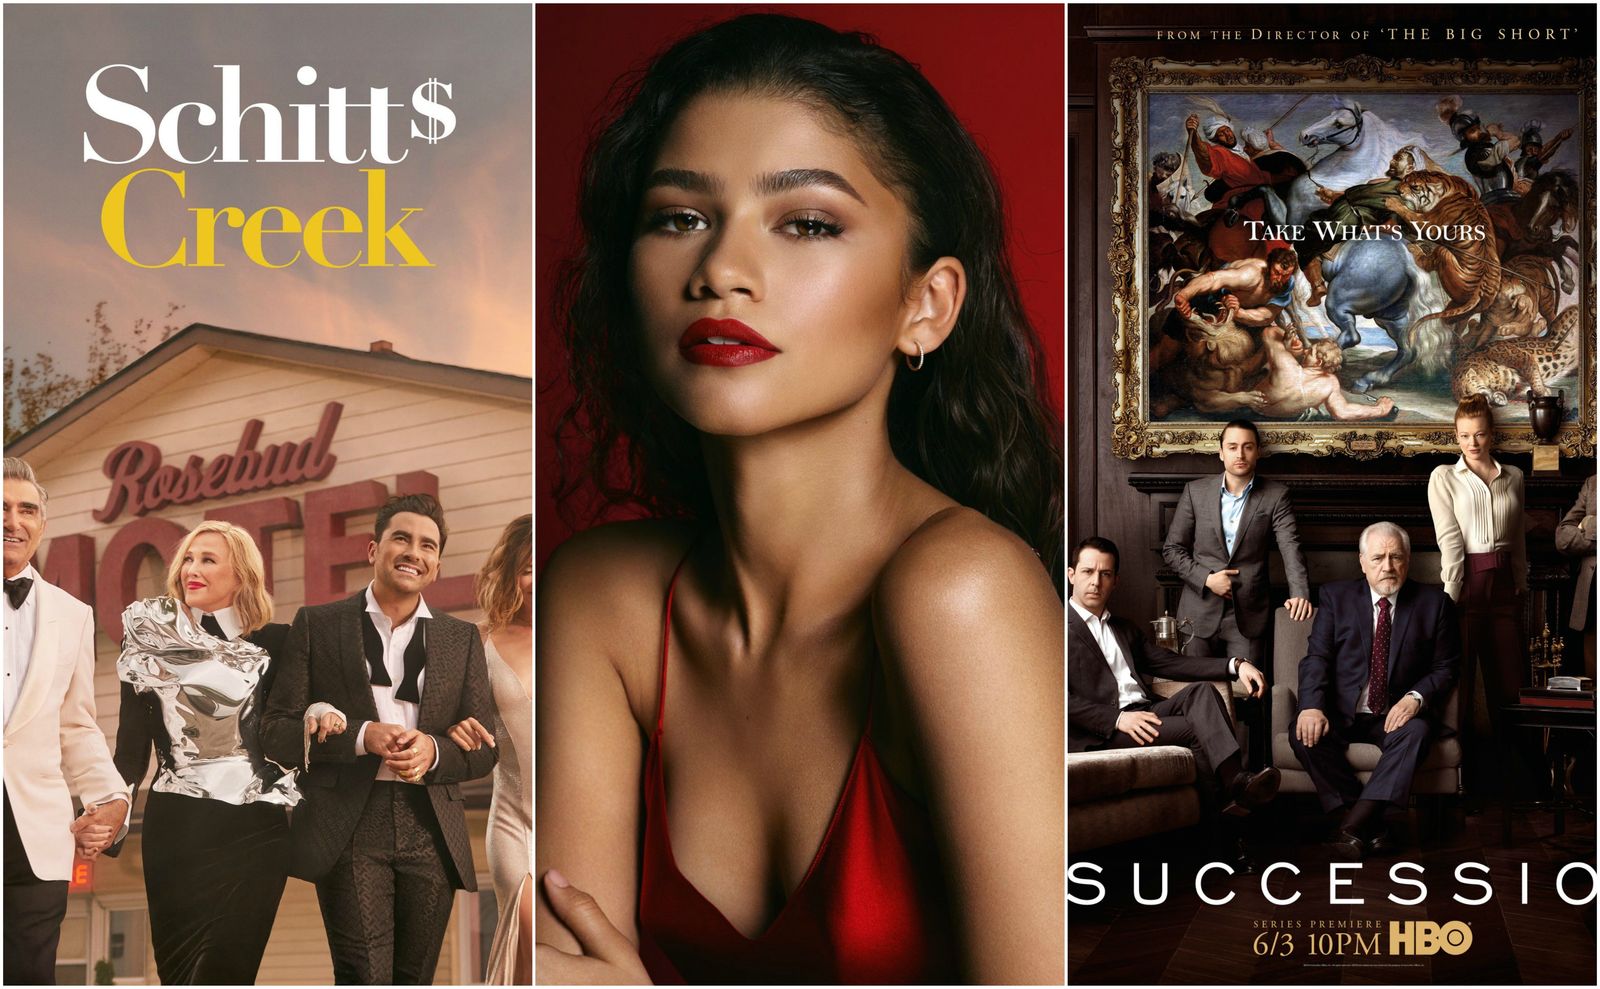 Emmy Awards 2020: Succession and Schitts’s Creek Win Big; Zendaya Becomes The Youngest Actress Ever To Win